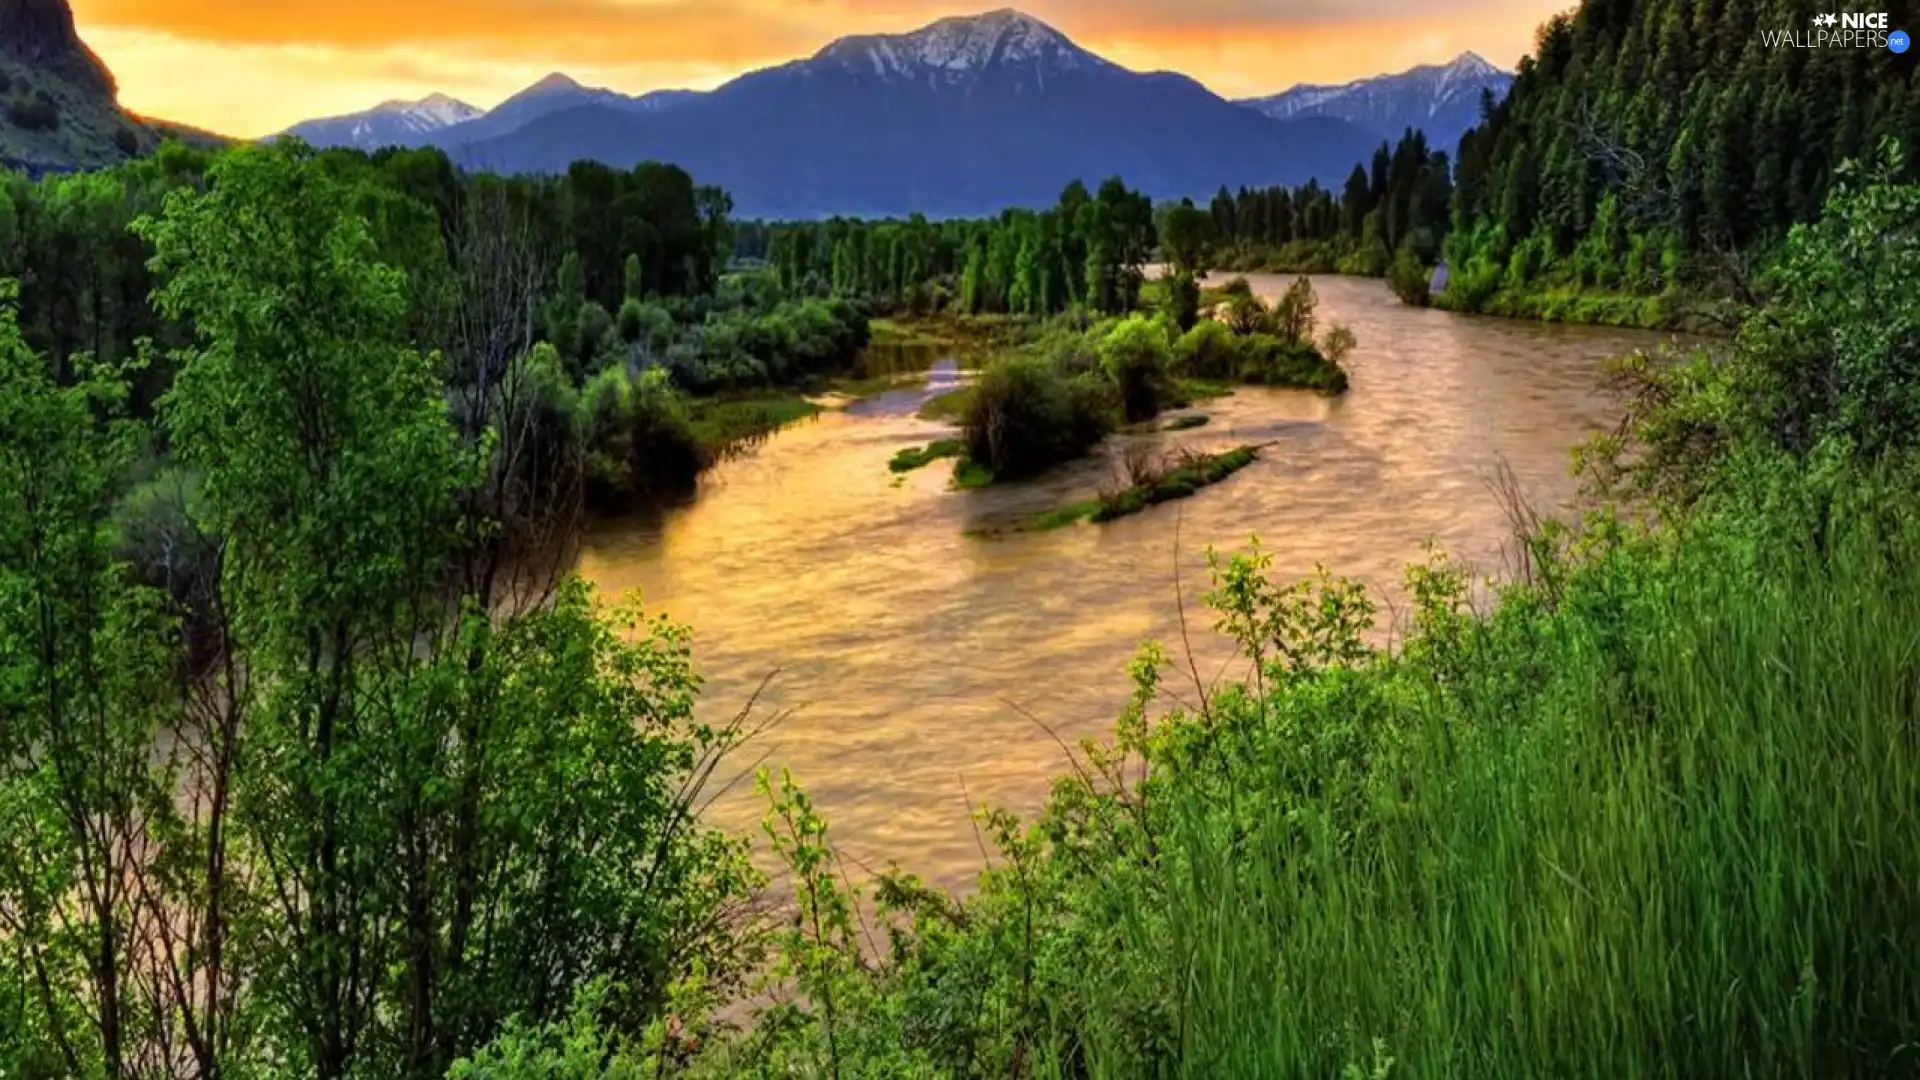 Mountains, forest, grass, River